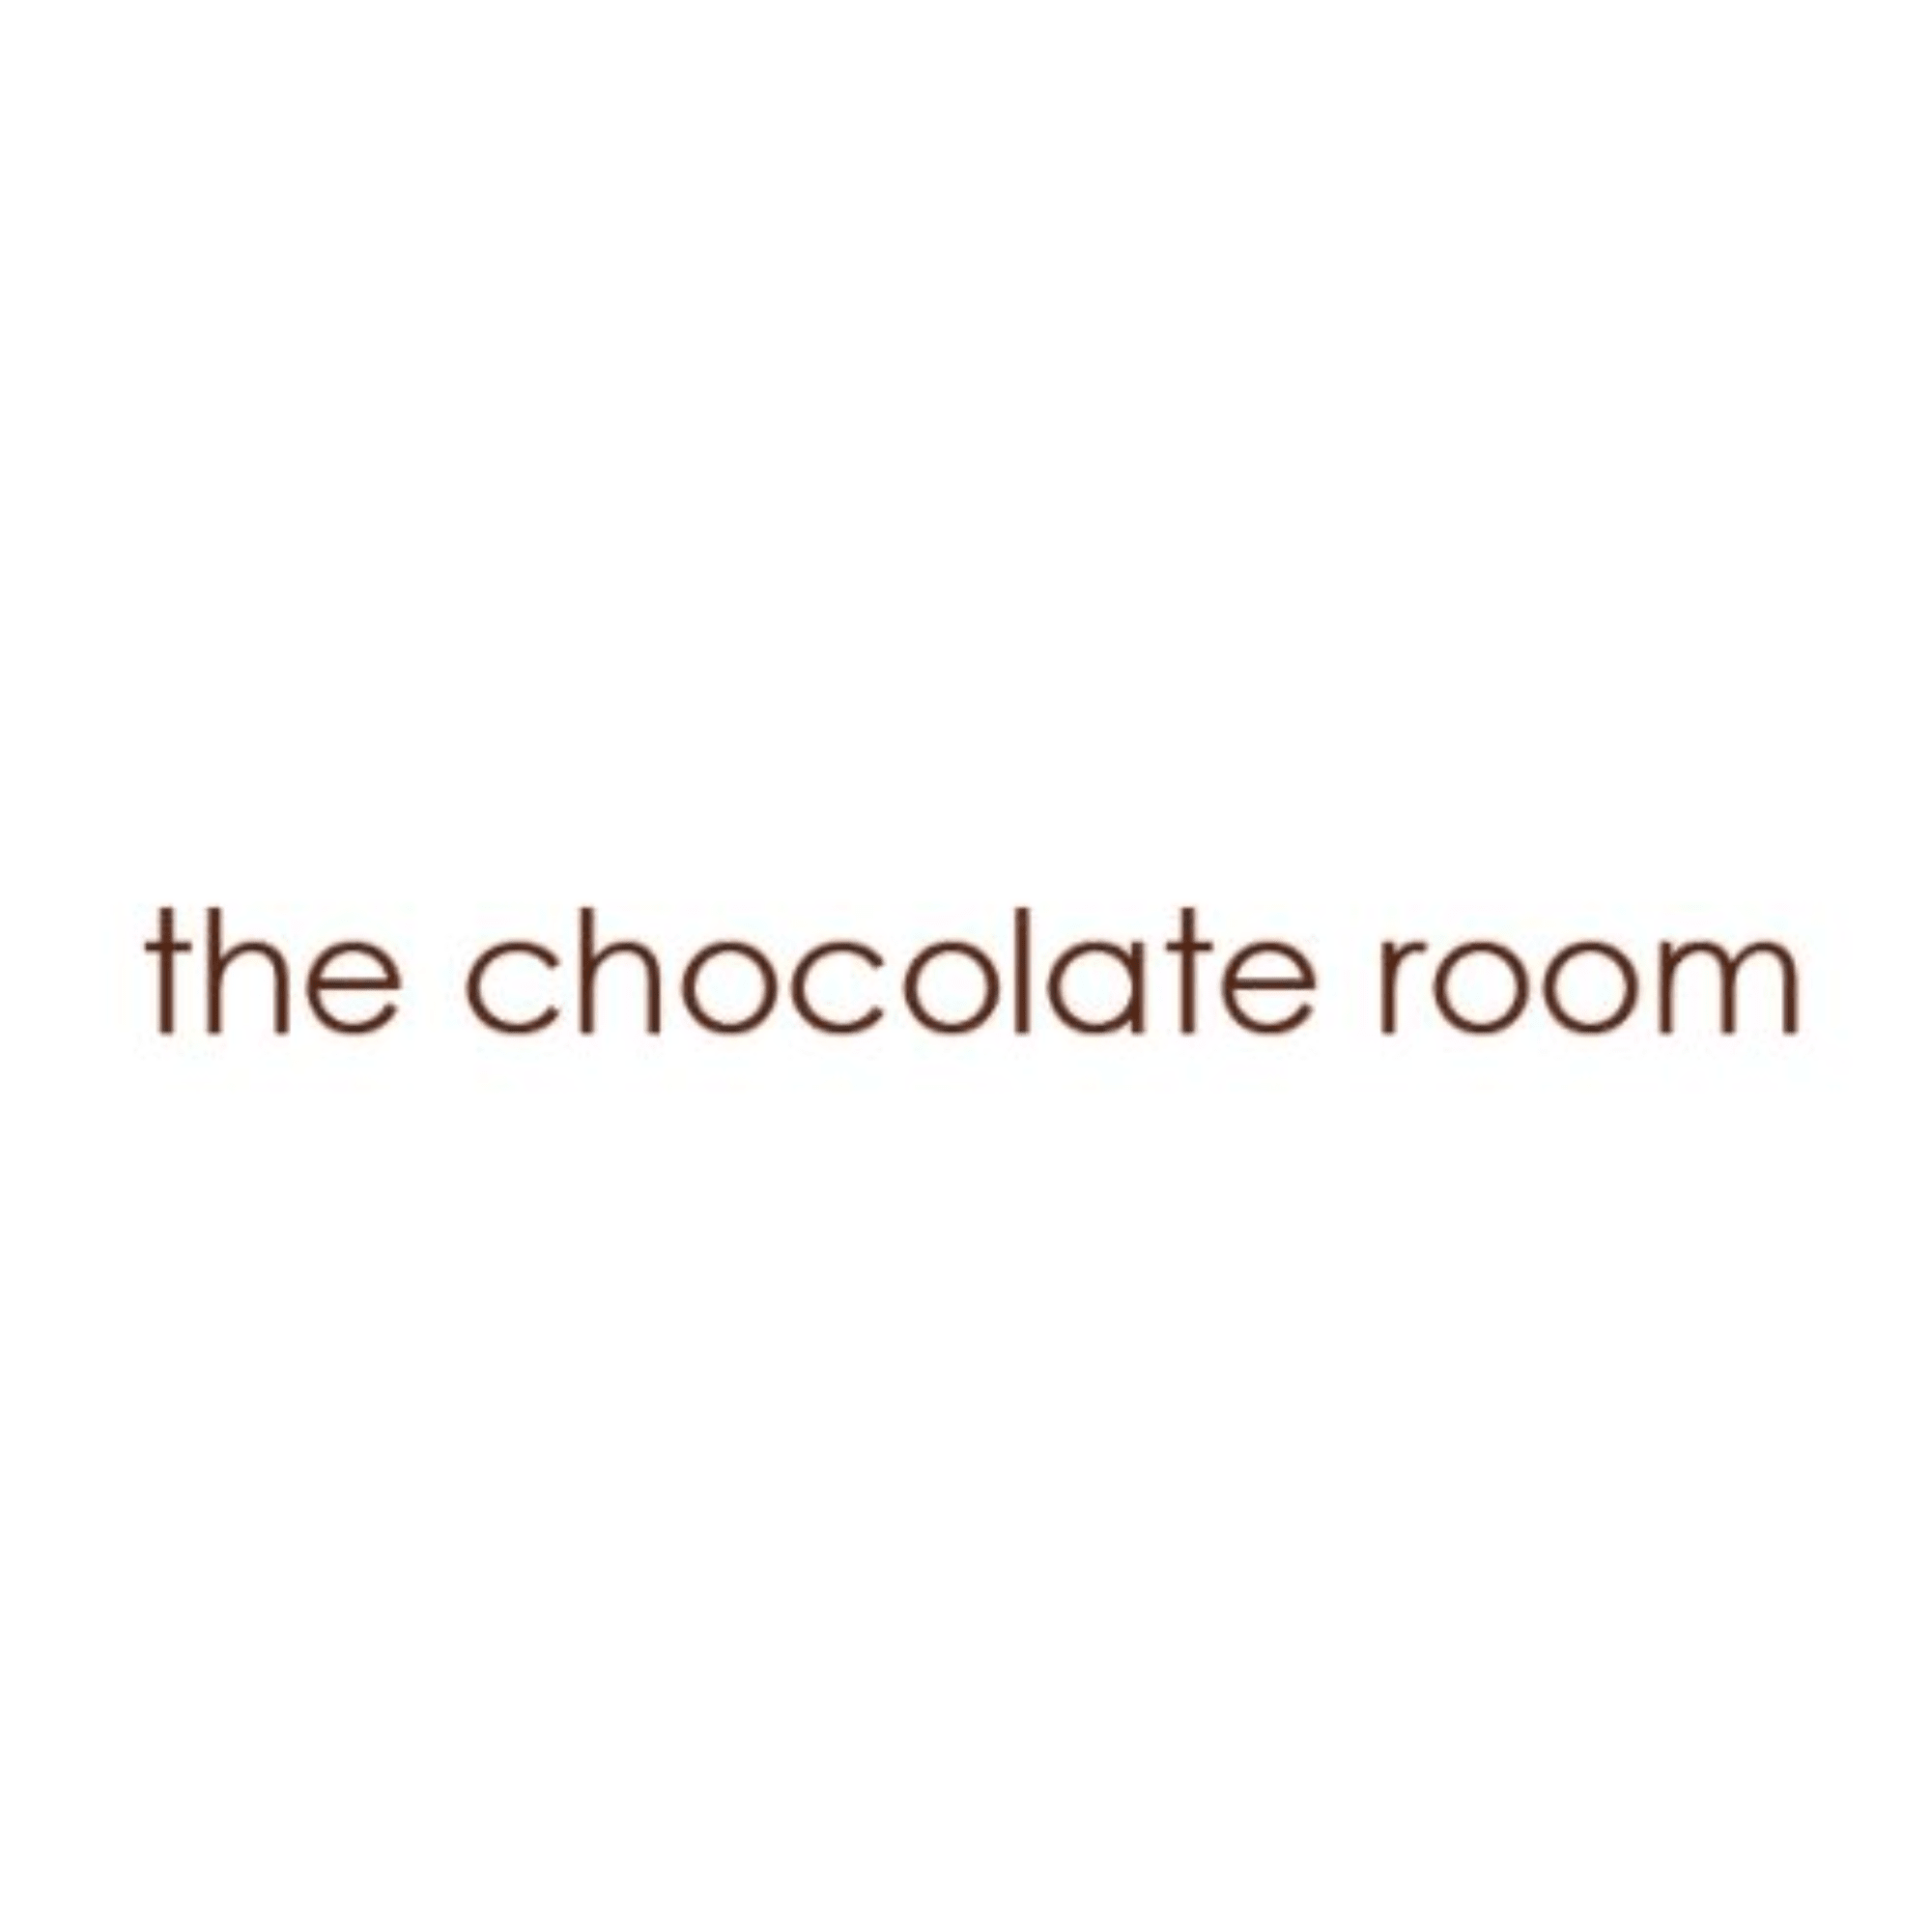 The Chocolate Room - Shop redesign